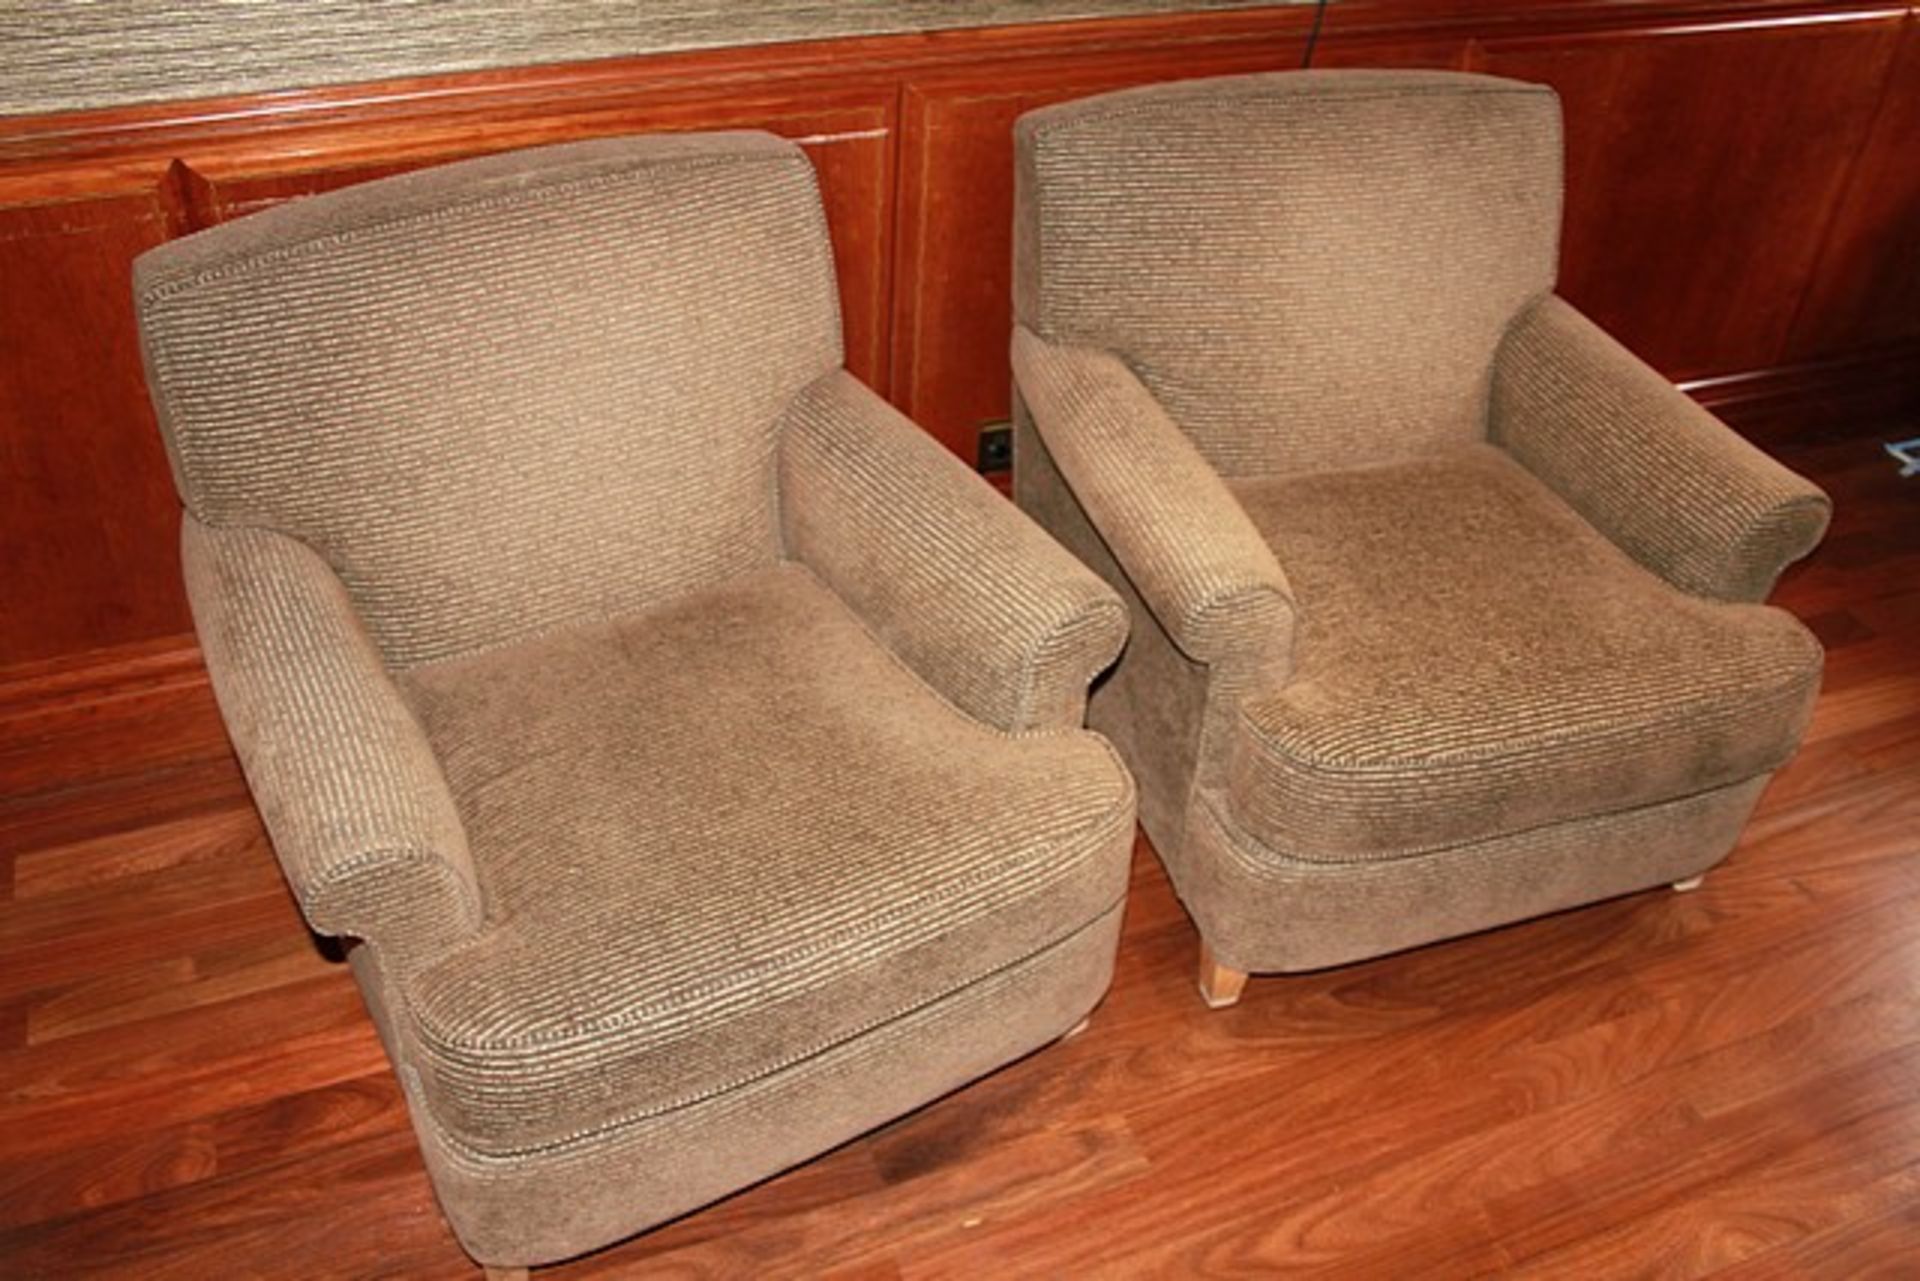 A pair of upholstered armchairs 520mm x 760mm x 880mm